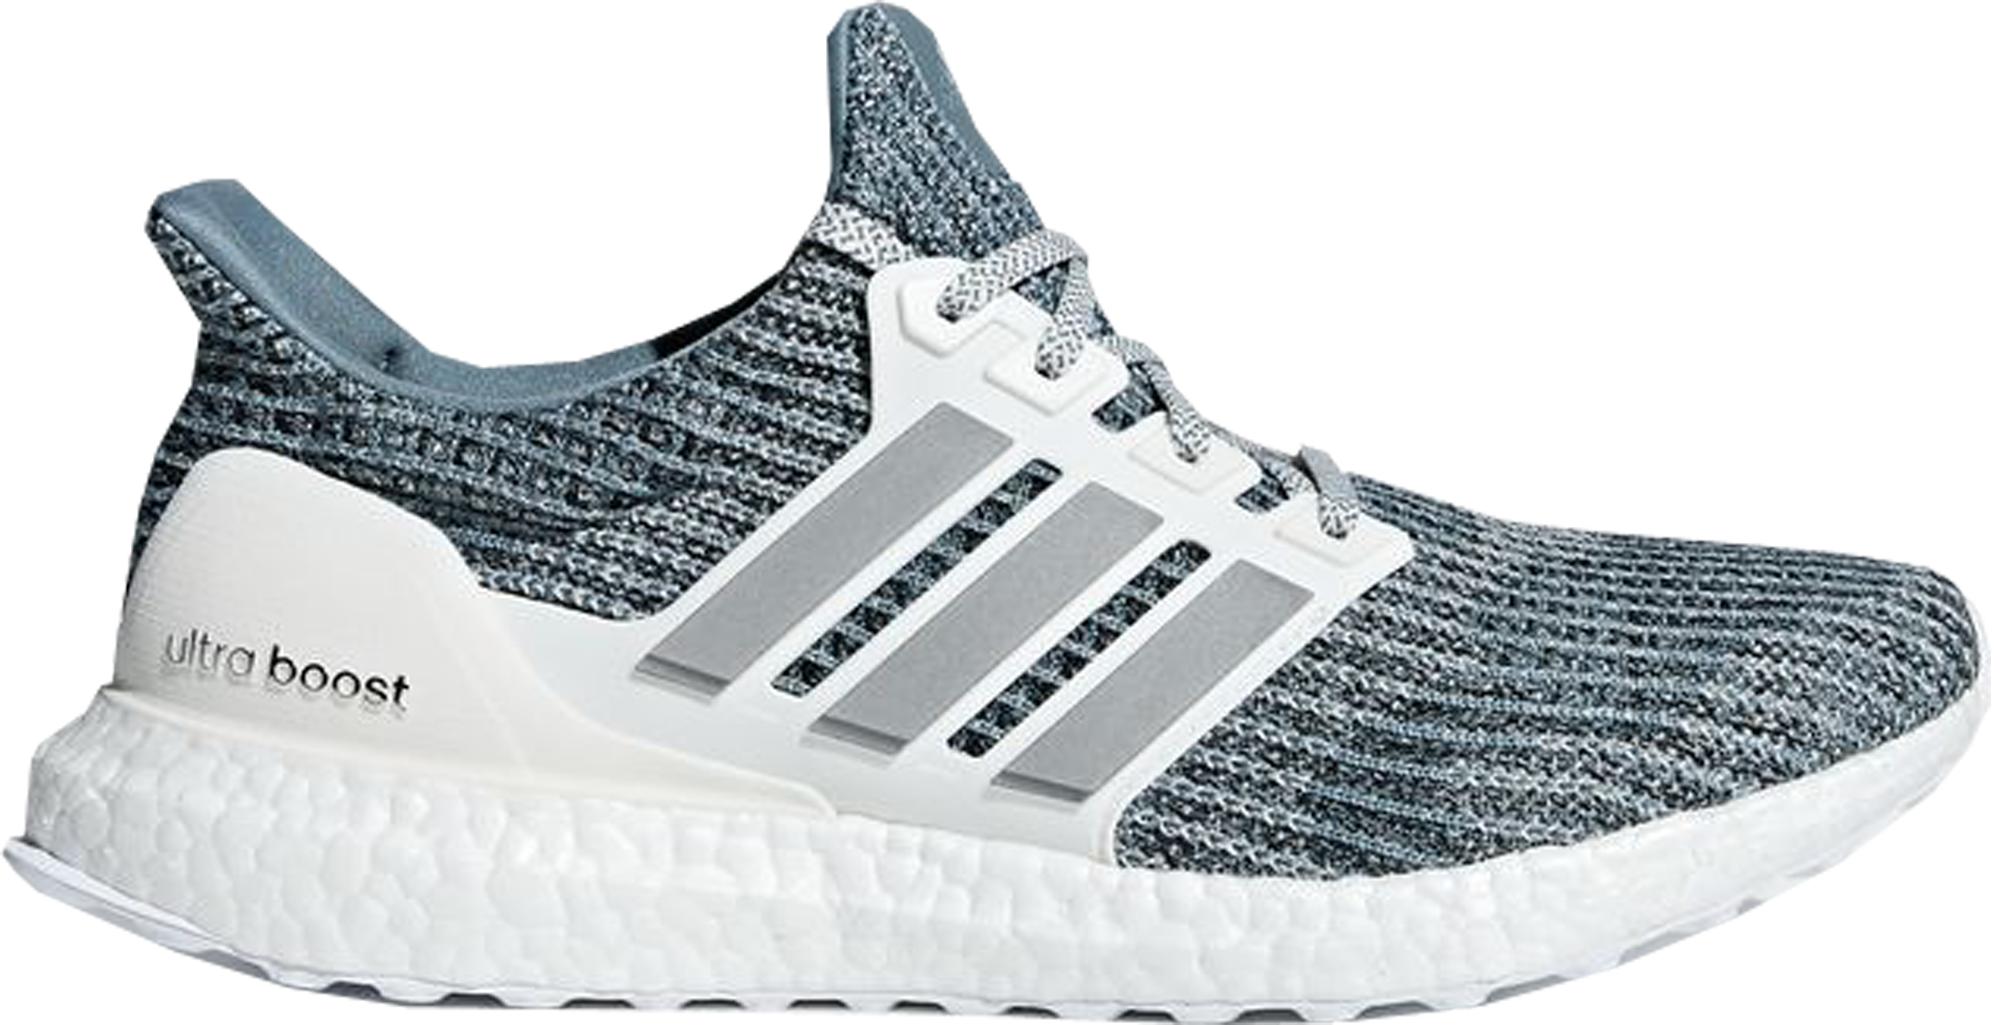 adidas Ultra Boost 4.0 Parley Running White in Metallic for Men - Lyst